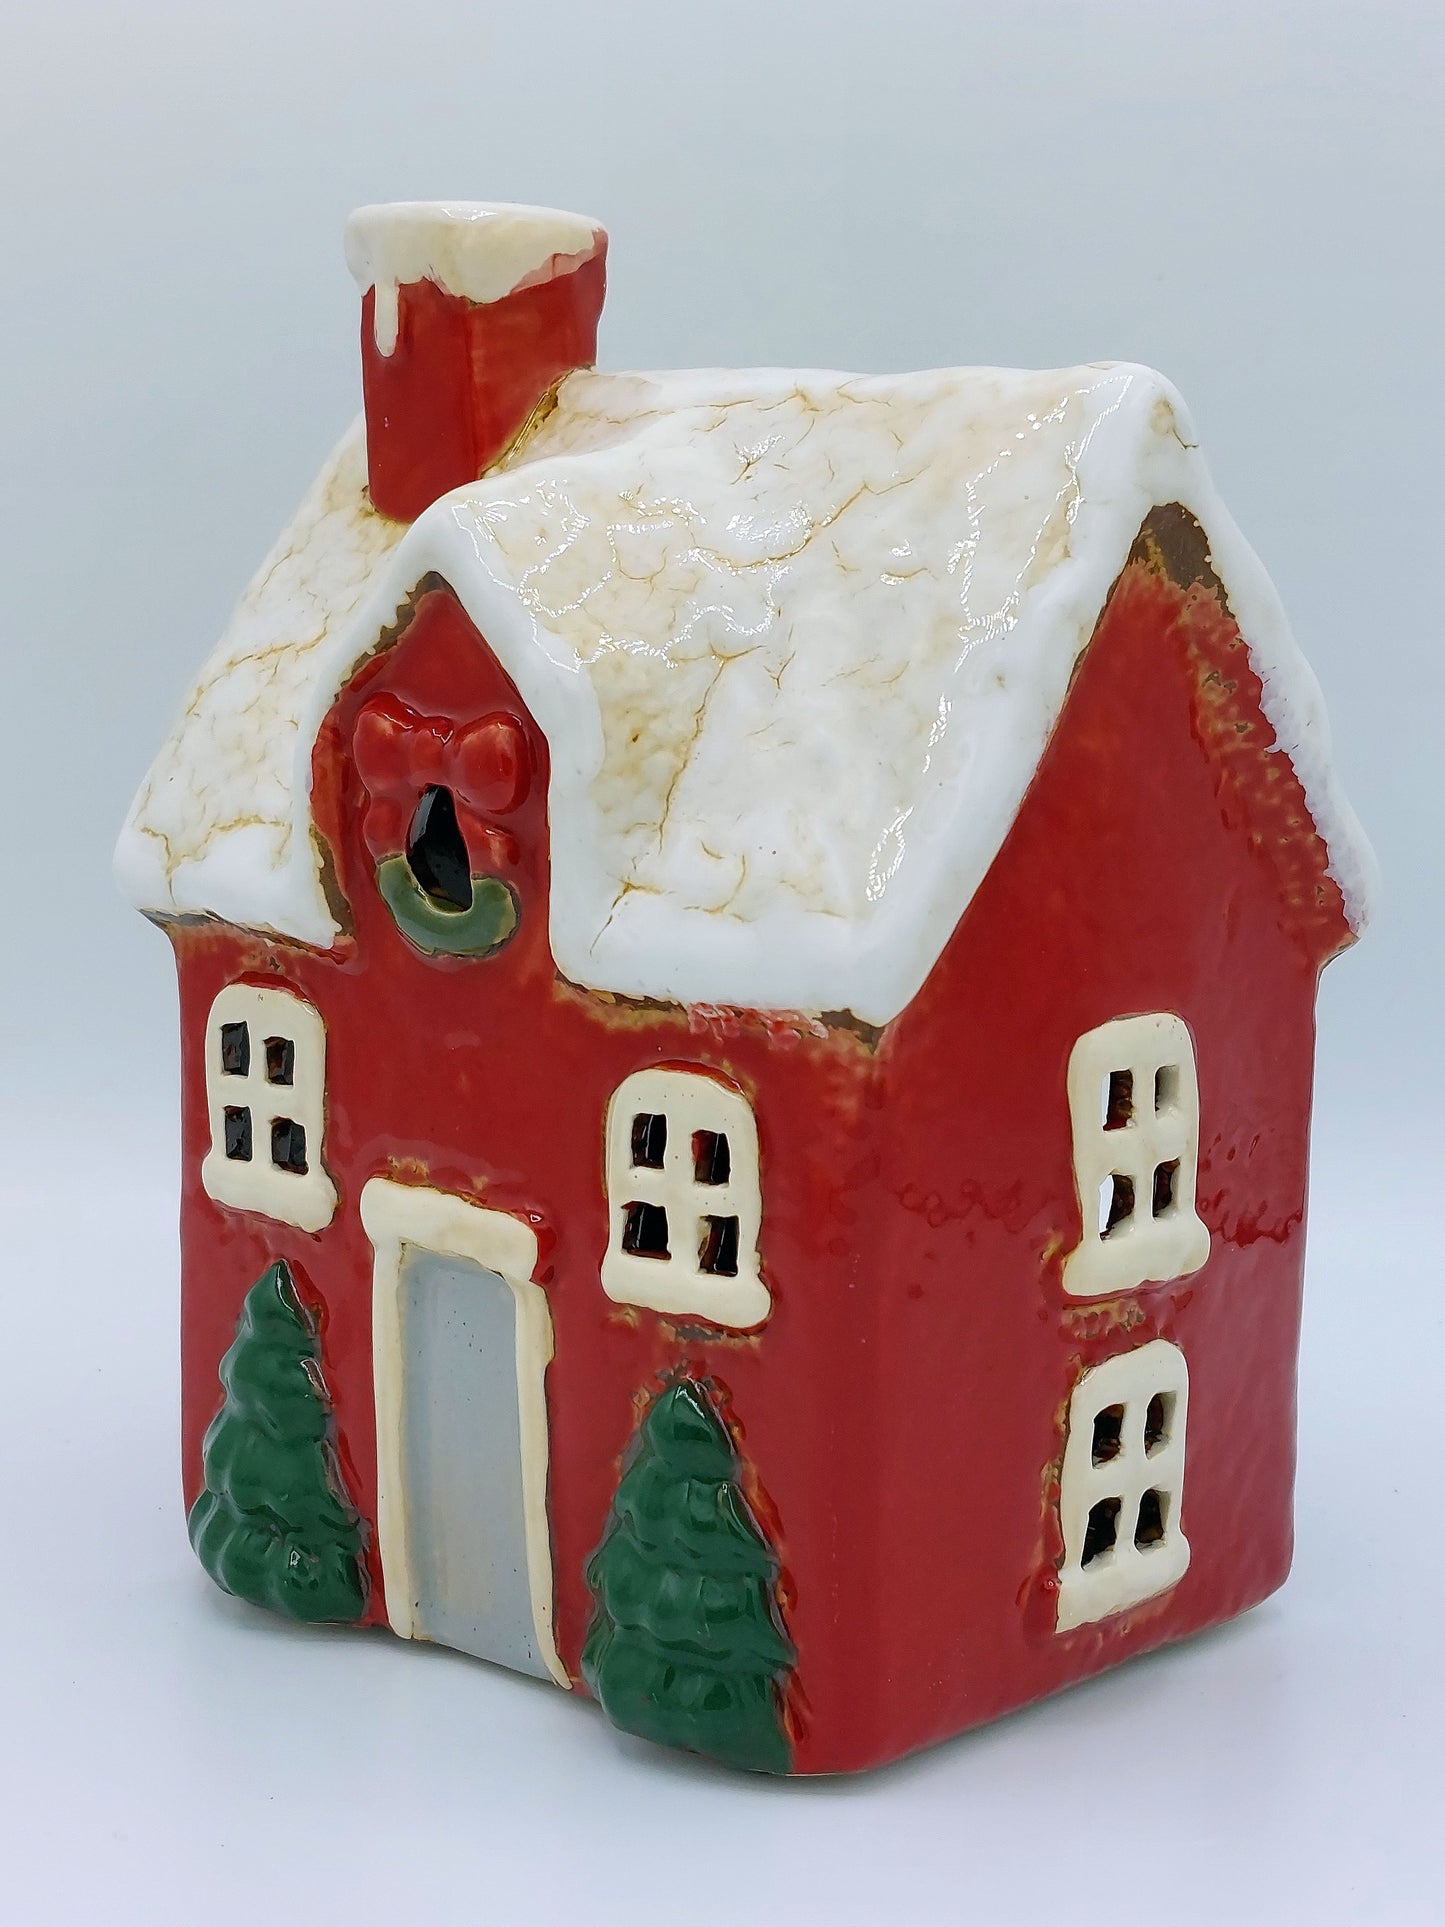 Little Red Ceramic House With Trees and Wreath